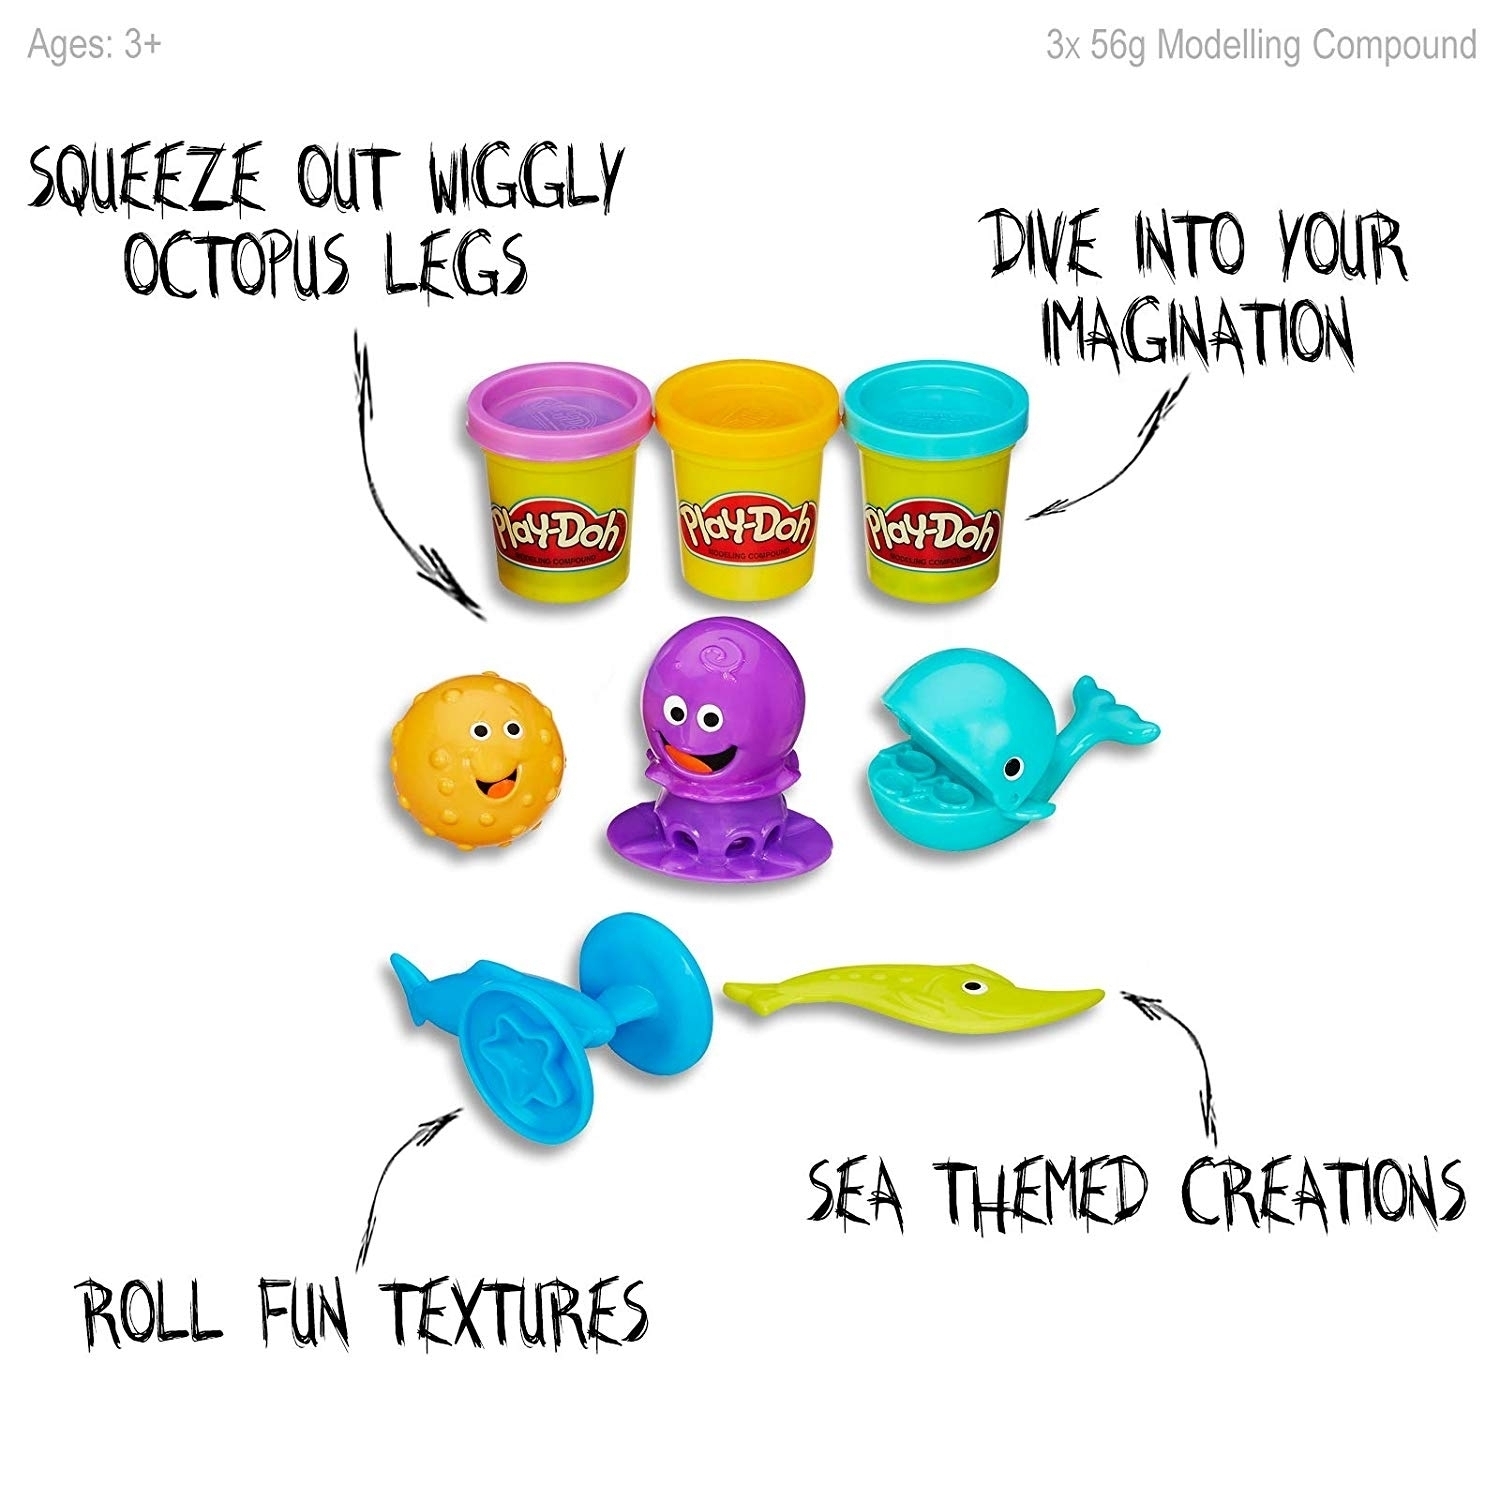 Play Doh Accessories from Octopus / Ocean Set - Replacement parts